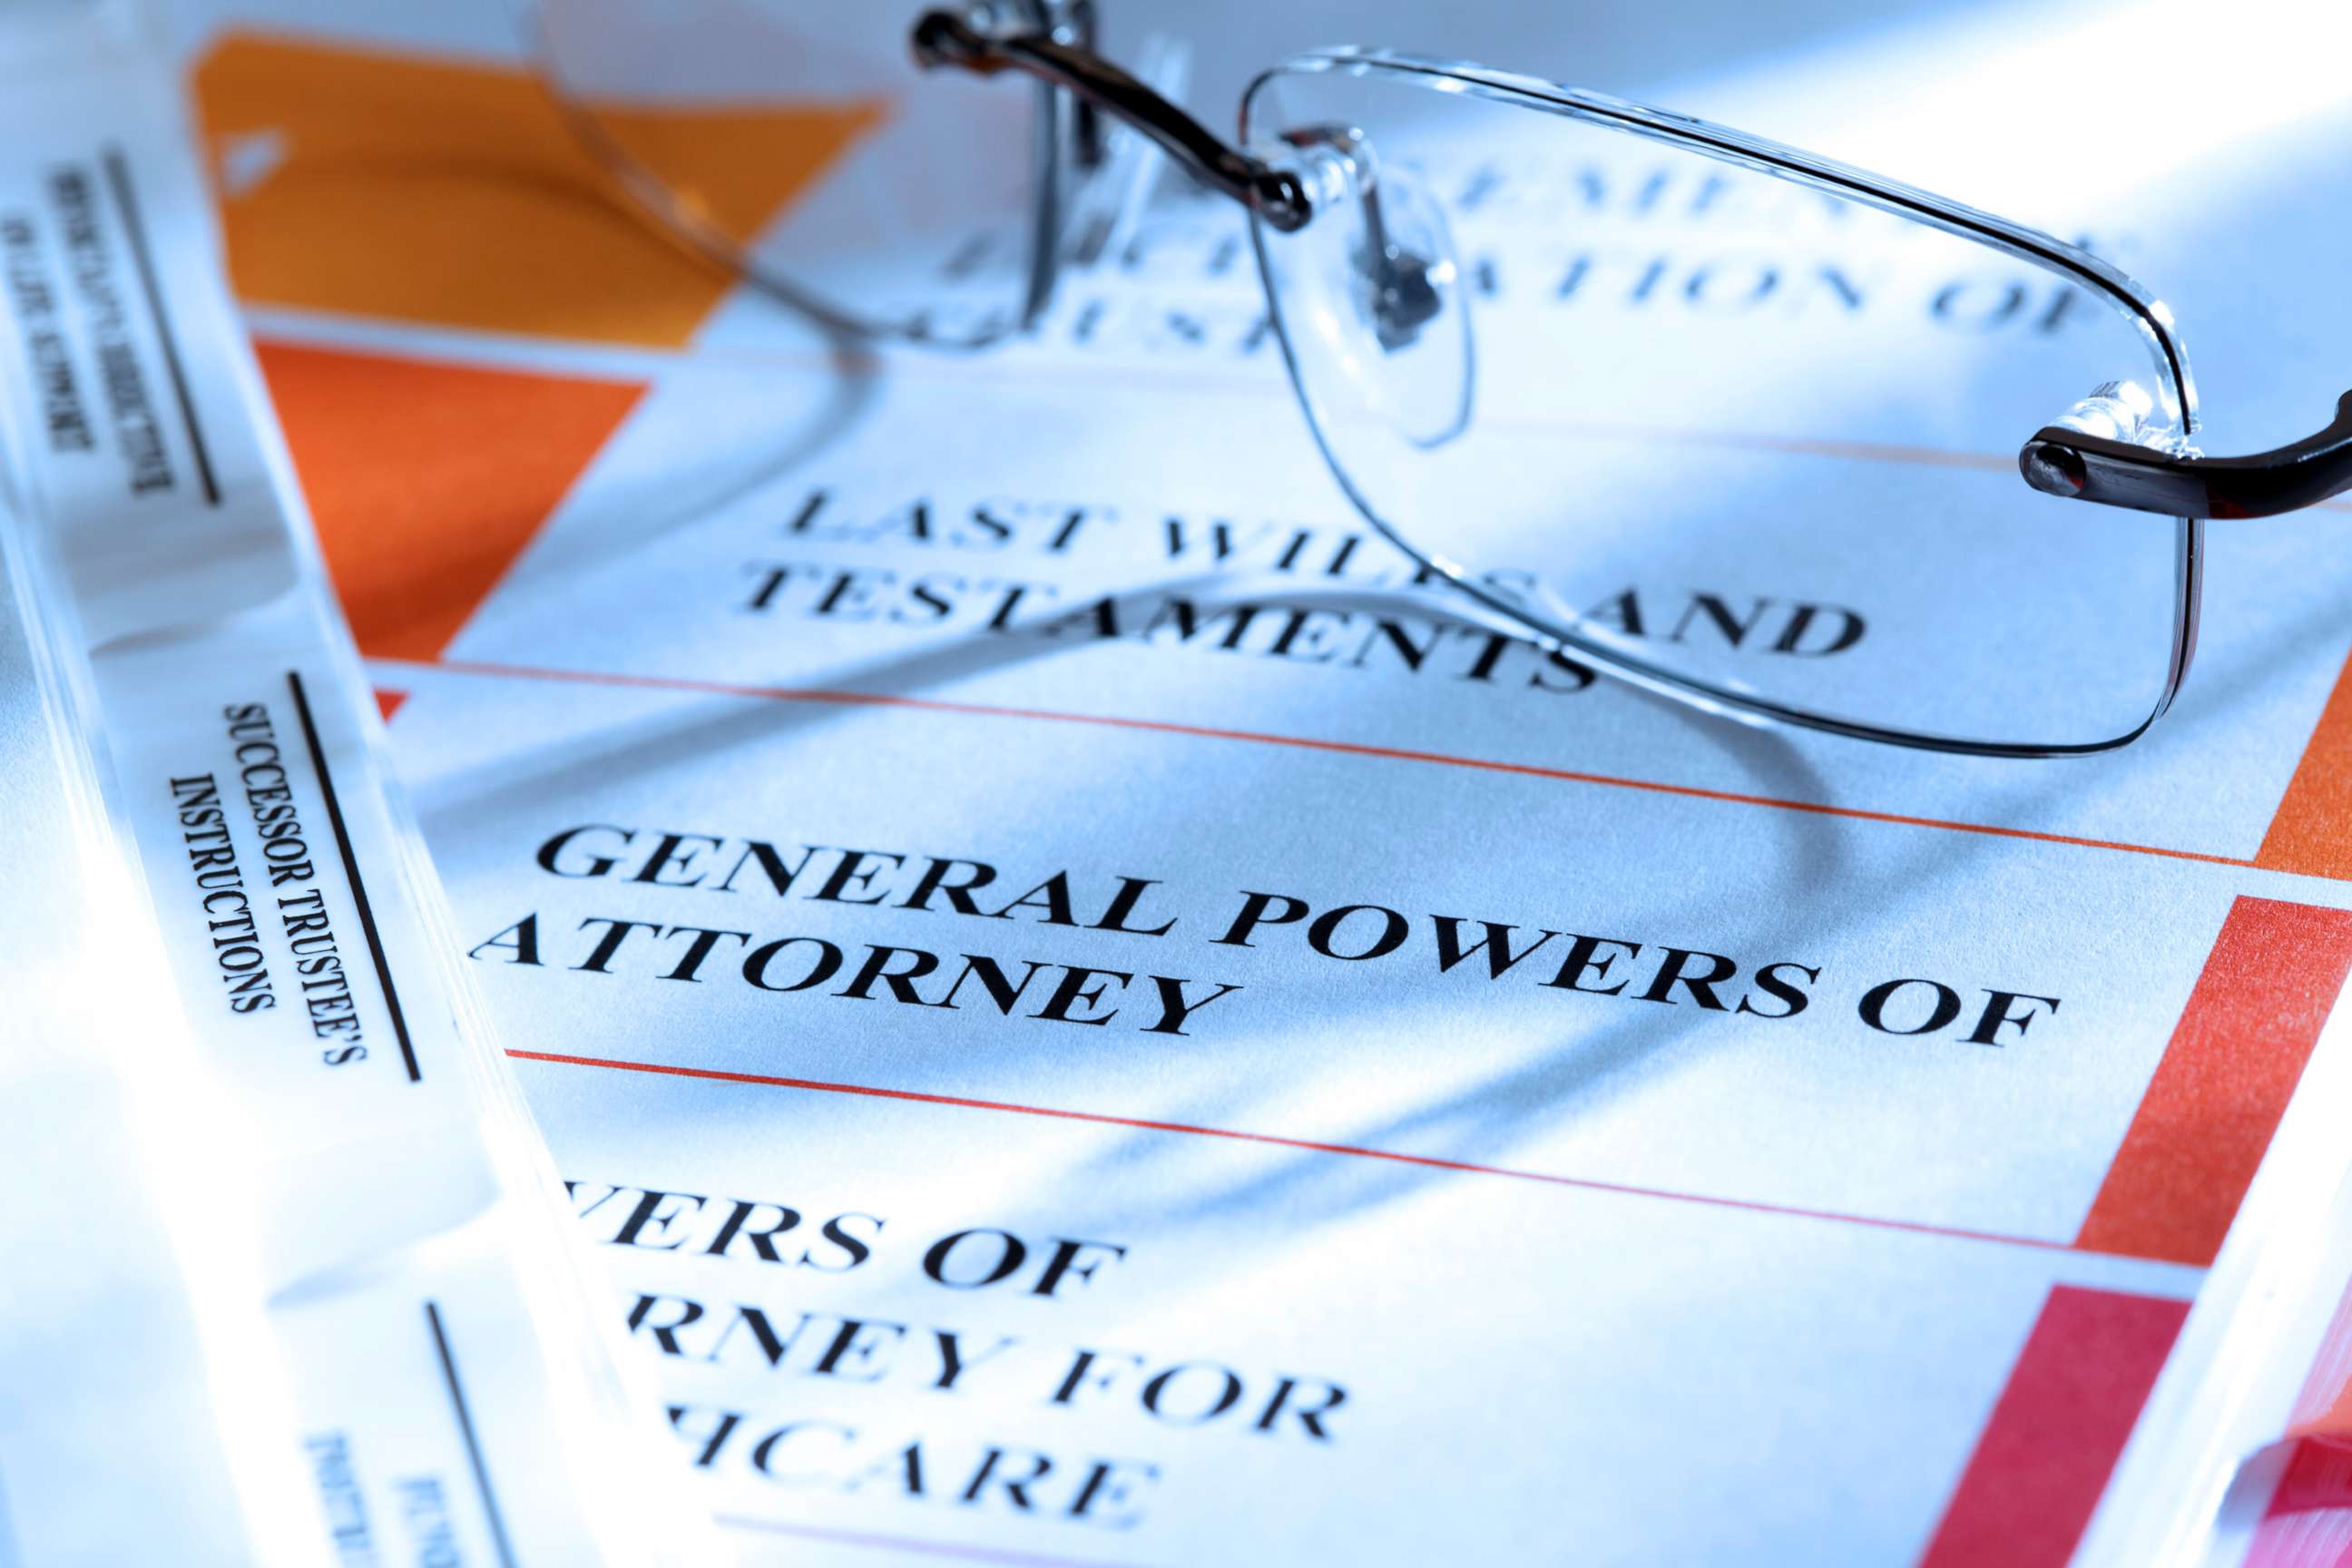 PHOTO: Documents including Will, Power of Attorney, and Healthcare Proxy.